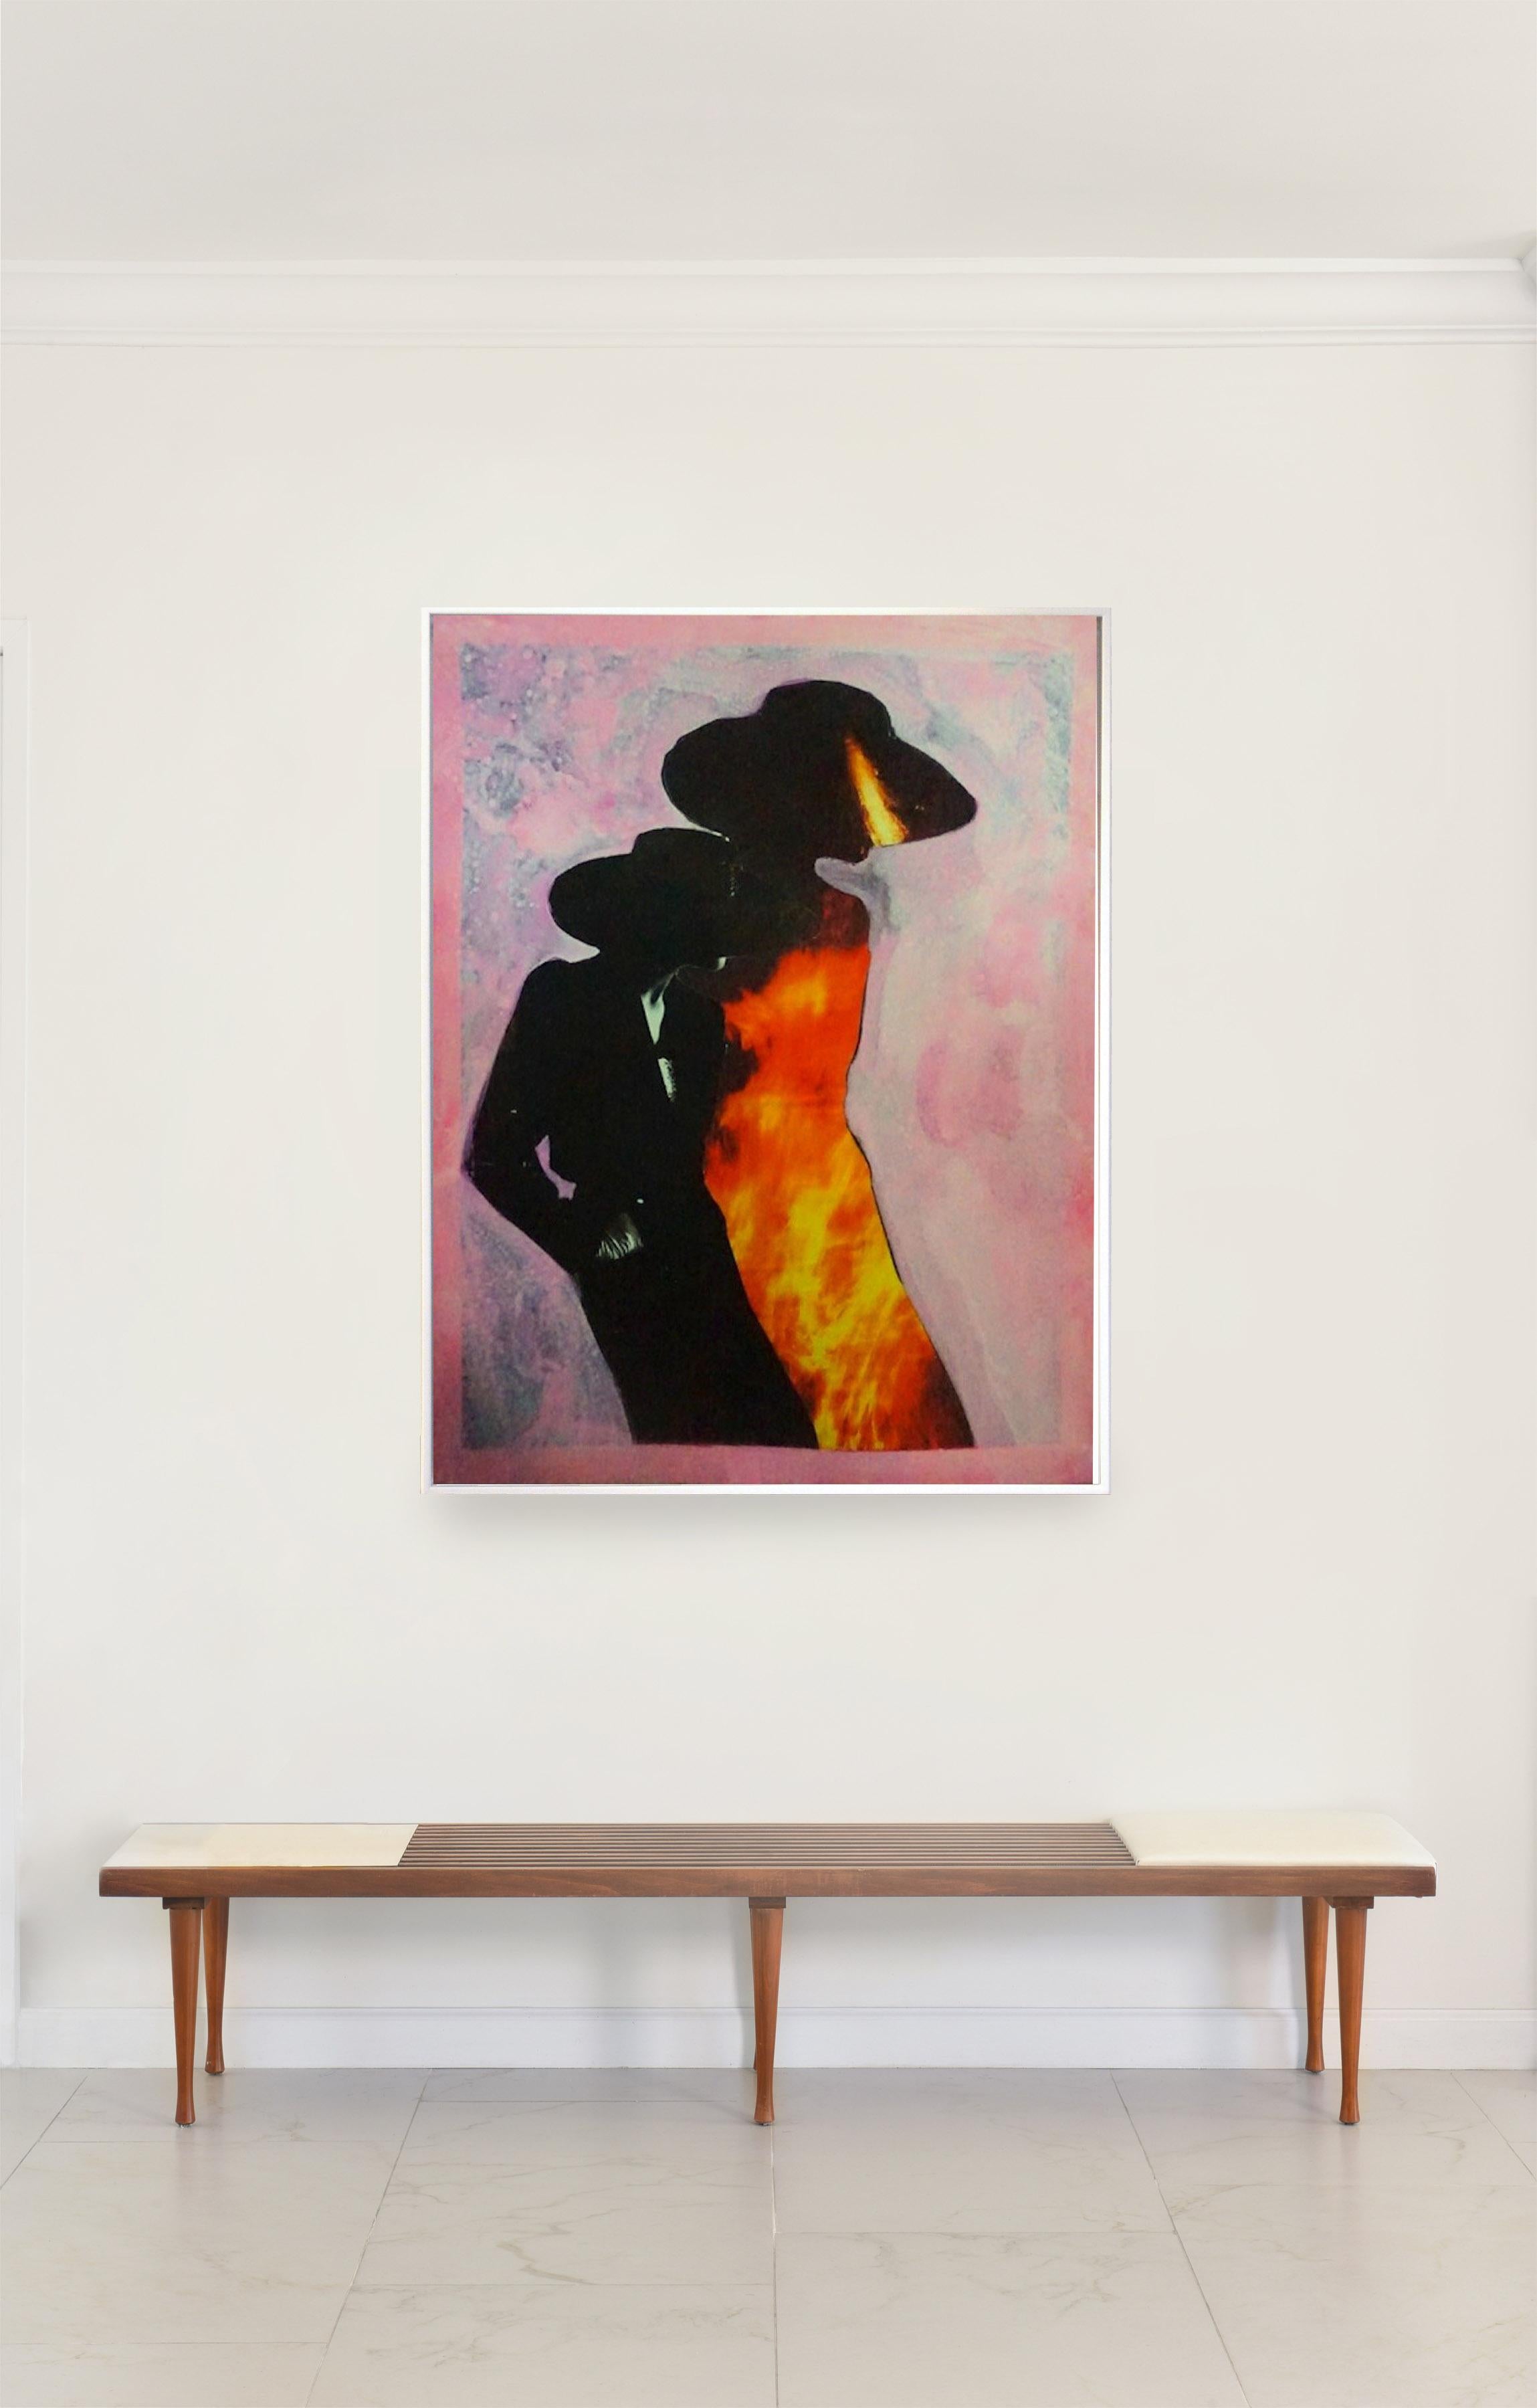 Burning Woman, #2250. Homage to Horst P. Horst collage color photograph - Photograph by Natasha Zupan